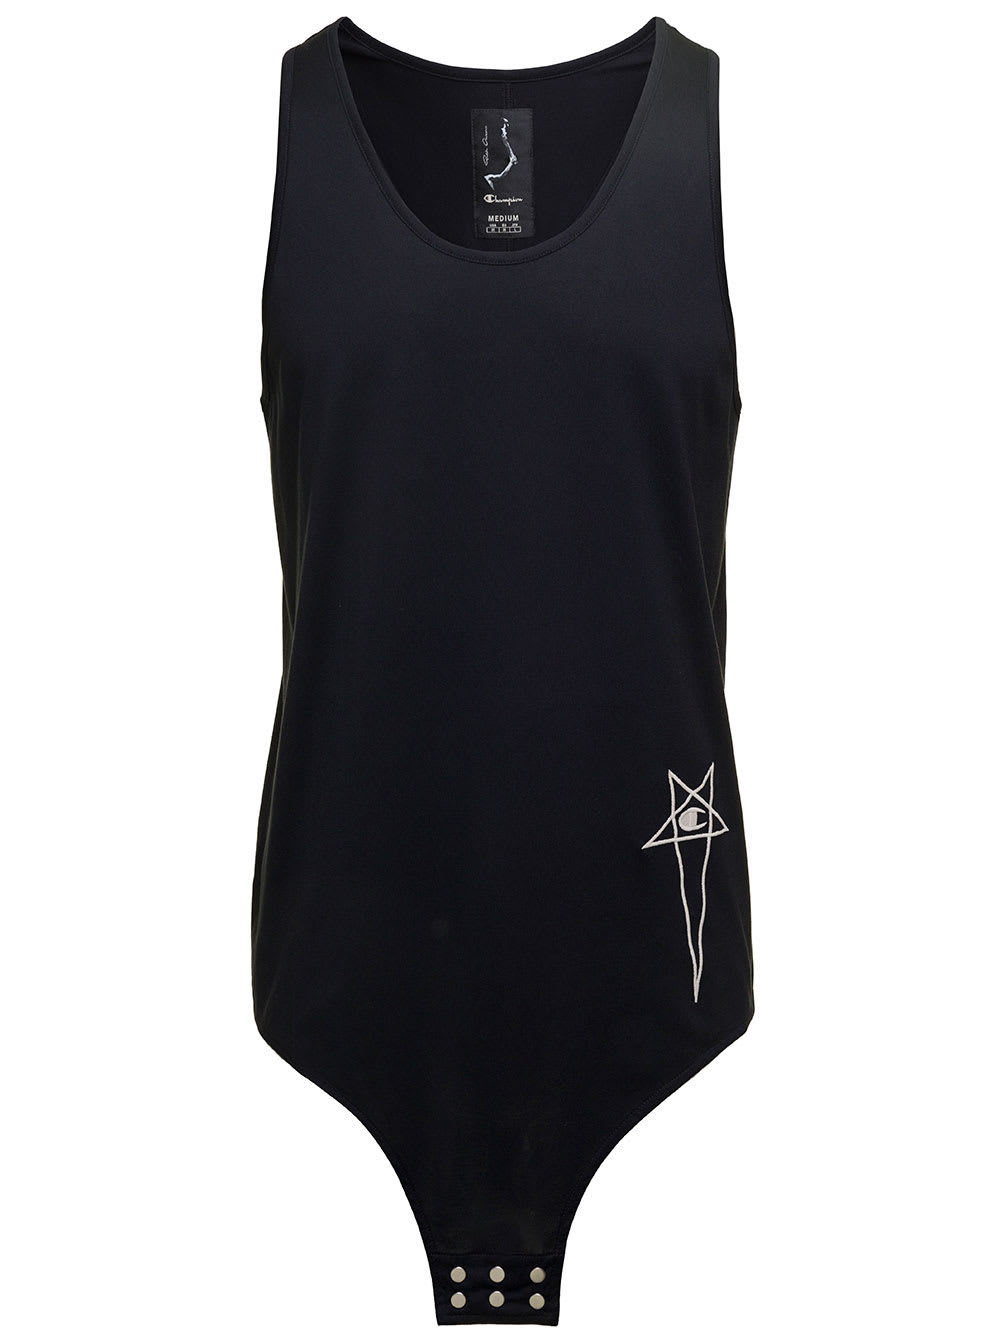 RICK OWENS BASKETBALL TANK LONG BLACK TANK TOP WITH PENTAGRAM EMBROIDERY AND A SIX SNAP CLOSURE HANGING IN COTT